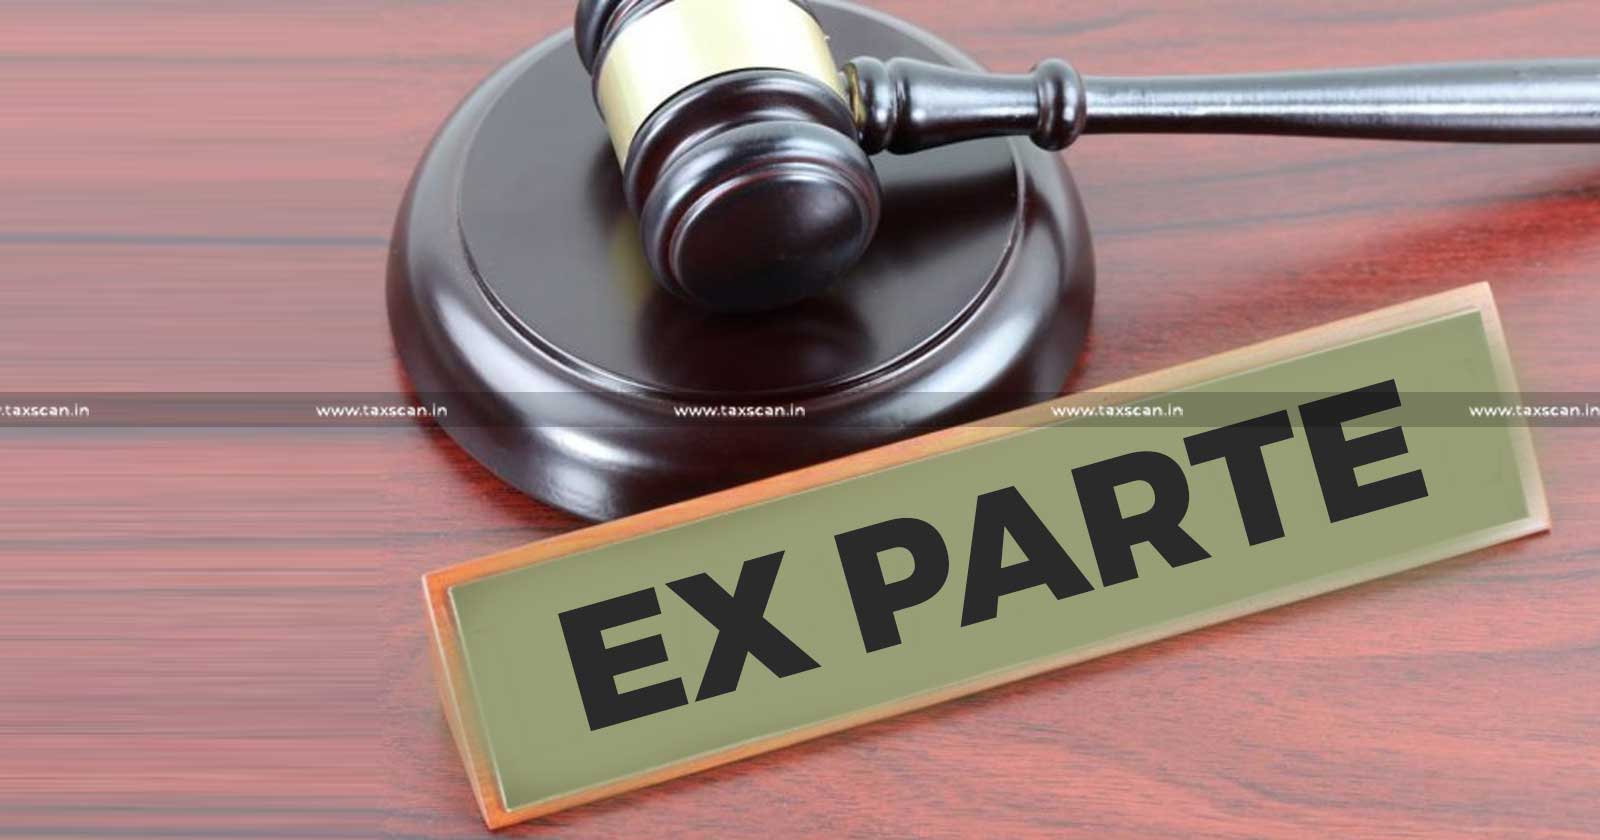 Ex-Parte Assessment Orders passed without considering Additional Evidence filed under Rule 46A of Income Tax Rules: ITAT directs Readjudication